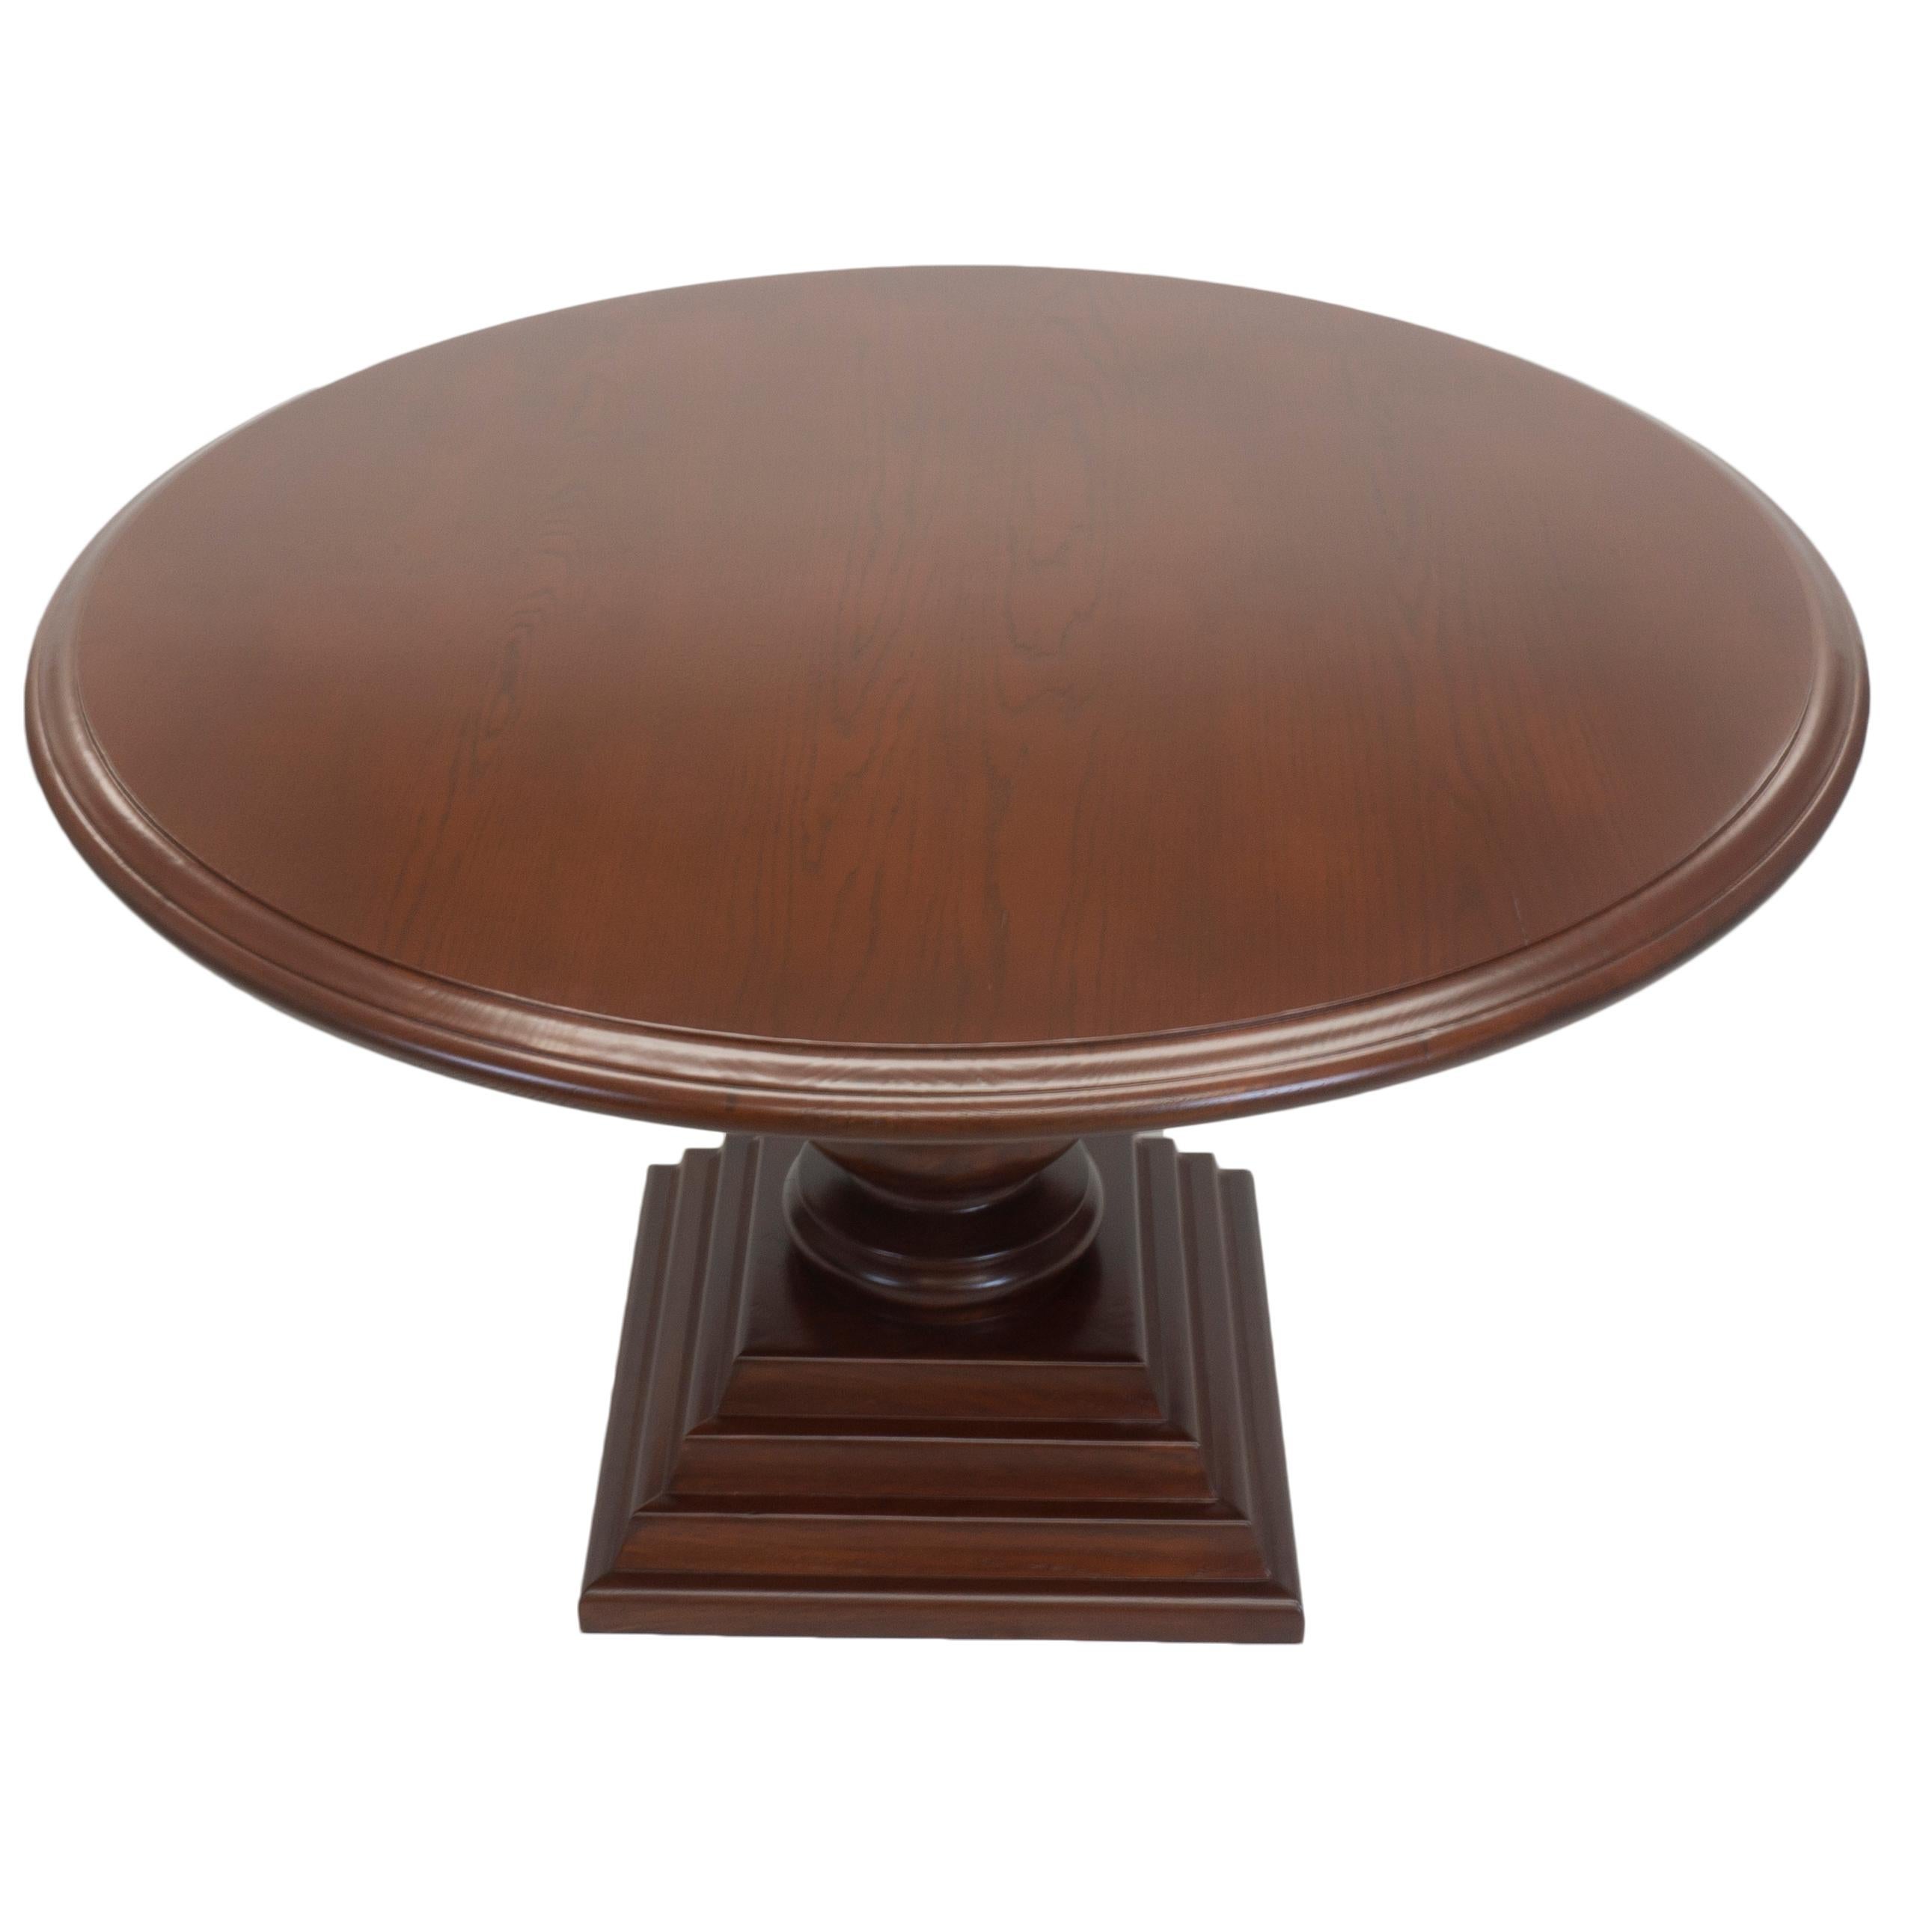 American Traditional Round Pedestal Dining Table For Sale